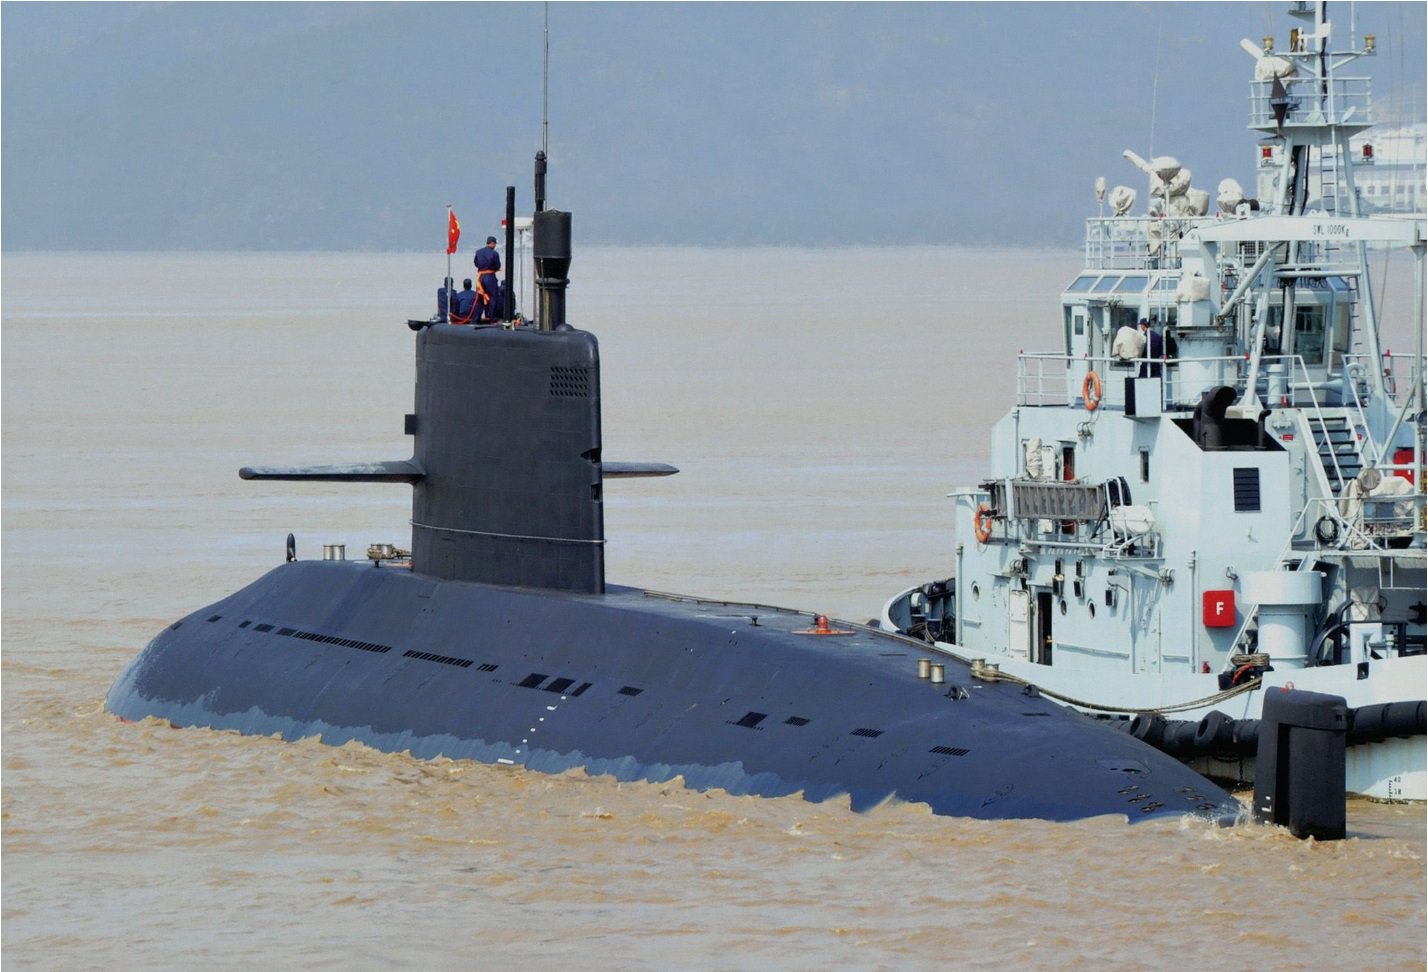 S26T Submarine is based on the China's People's Liberation Army Navy Type 039A SSK